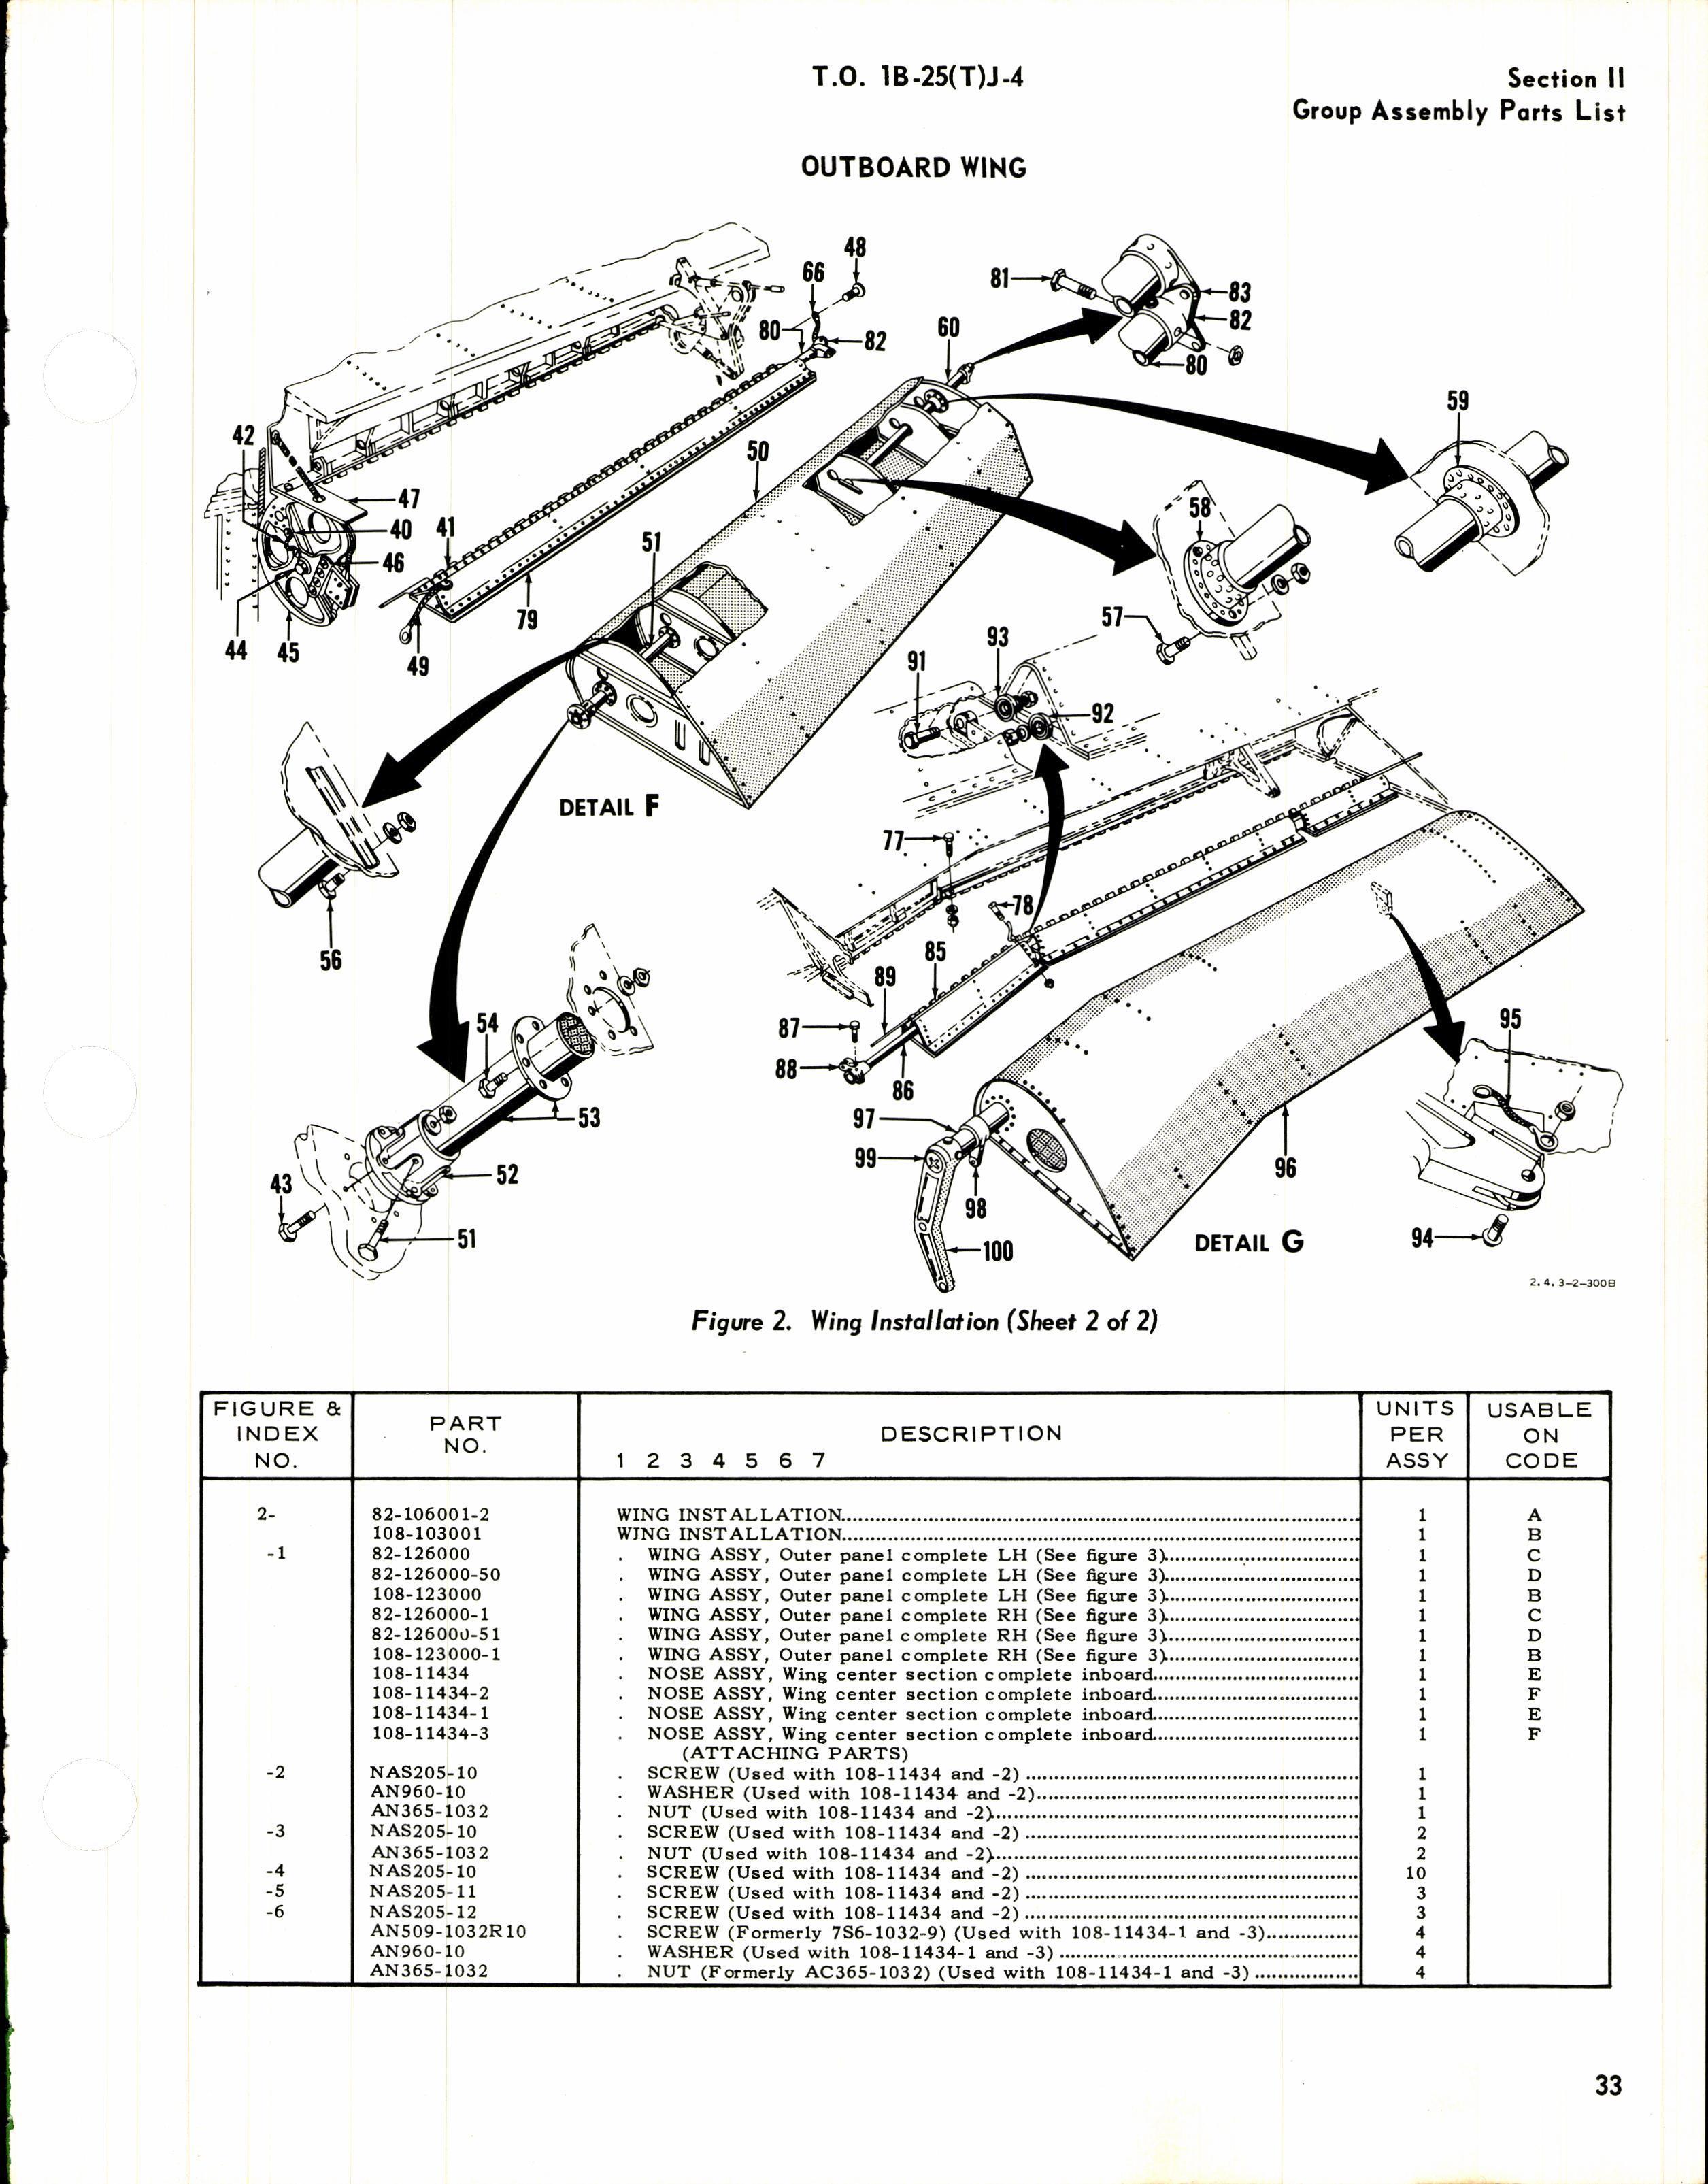 Sample page 13 from AirCorps Library document: Illustrated Parts Breakdown for B-25J, L, and N